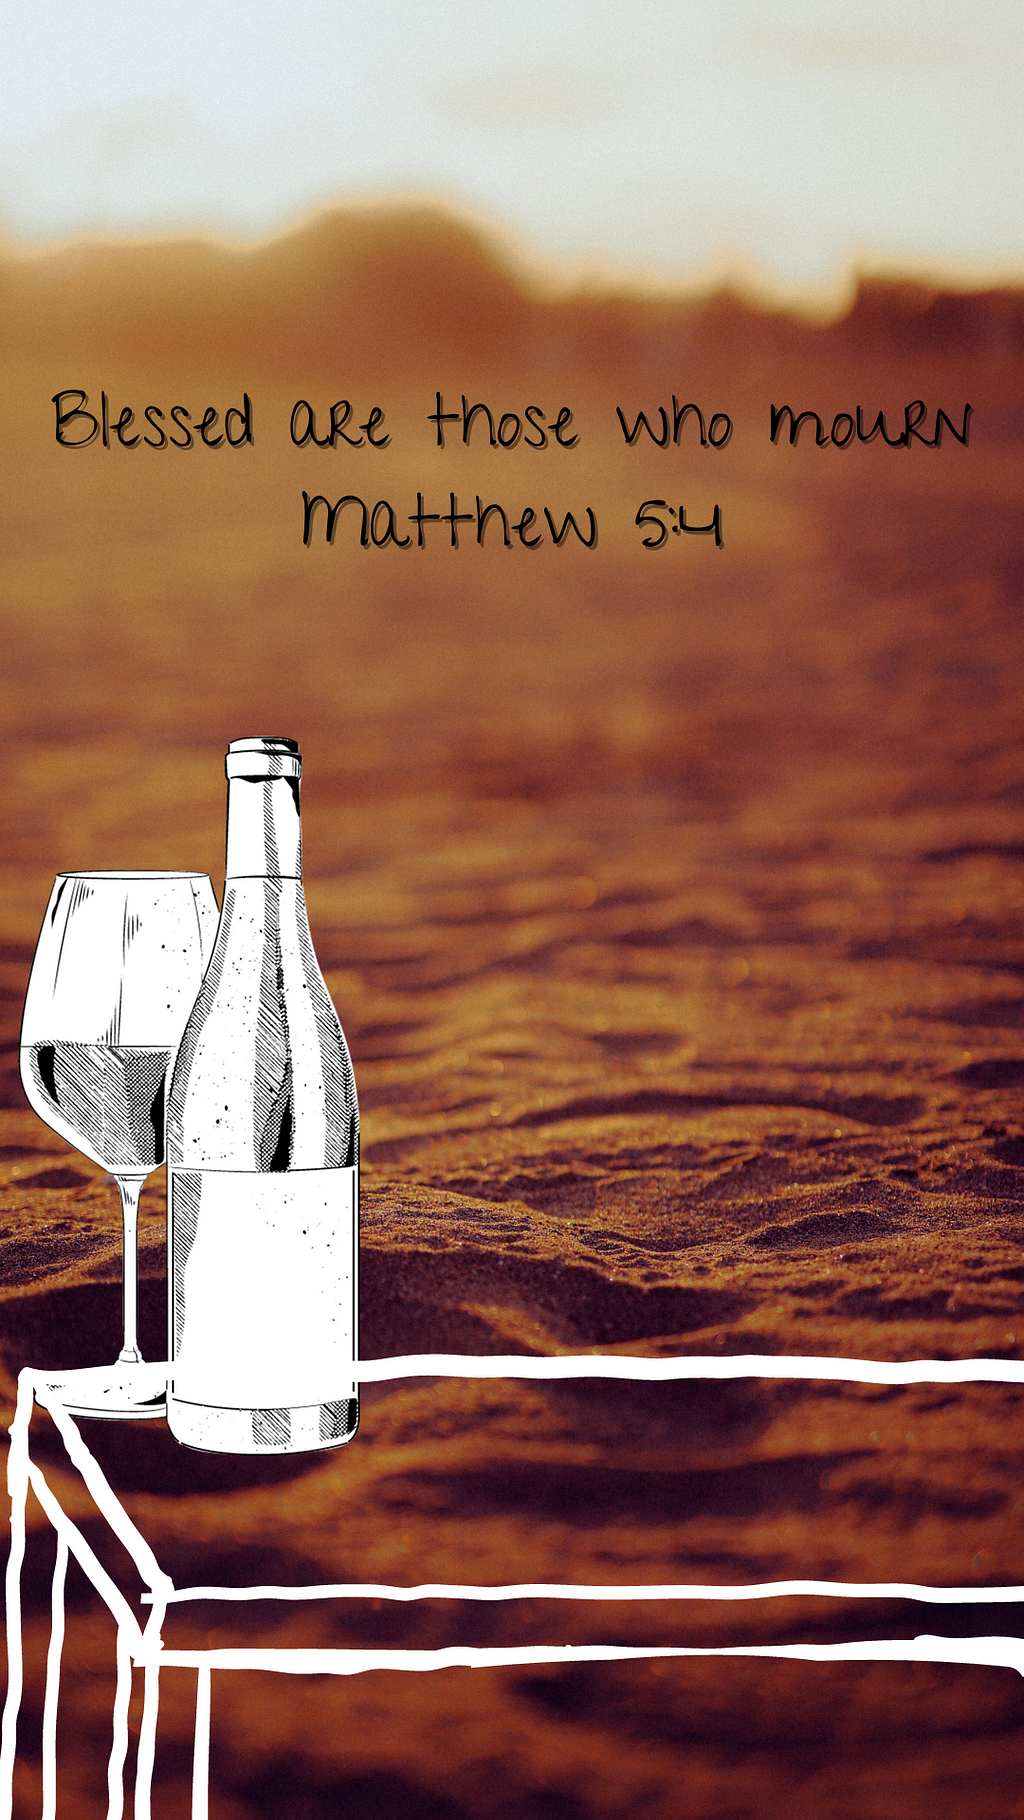 An image highlighting the Bible verse “Blessed are those who mourn,” displaying beach sand, and a table with a wine bottle and glass.